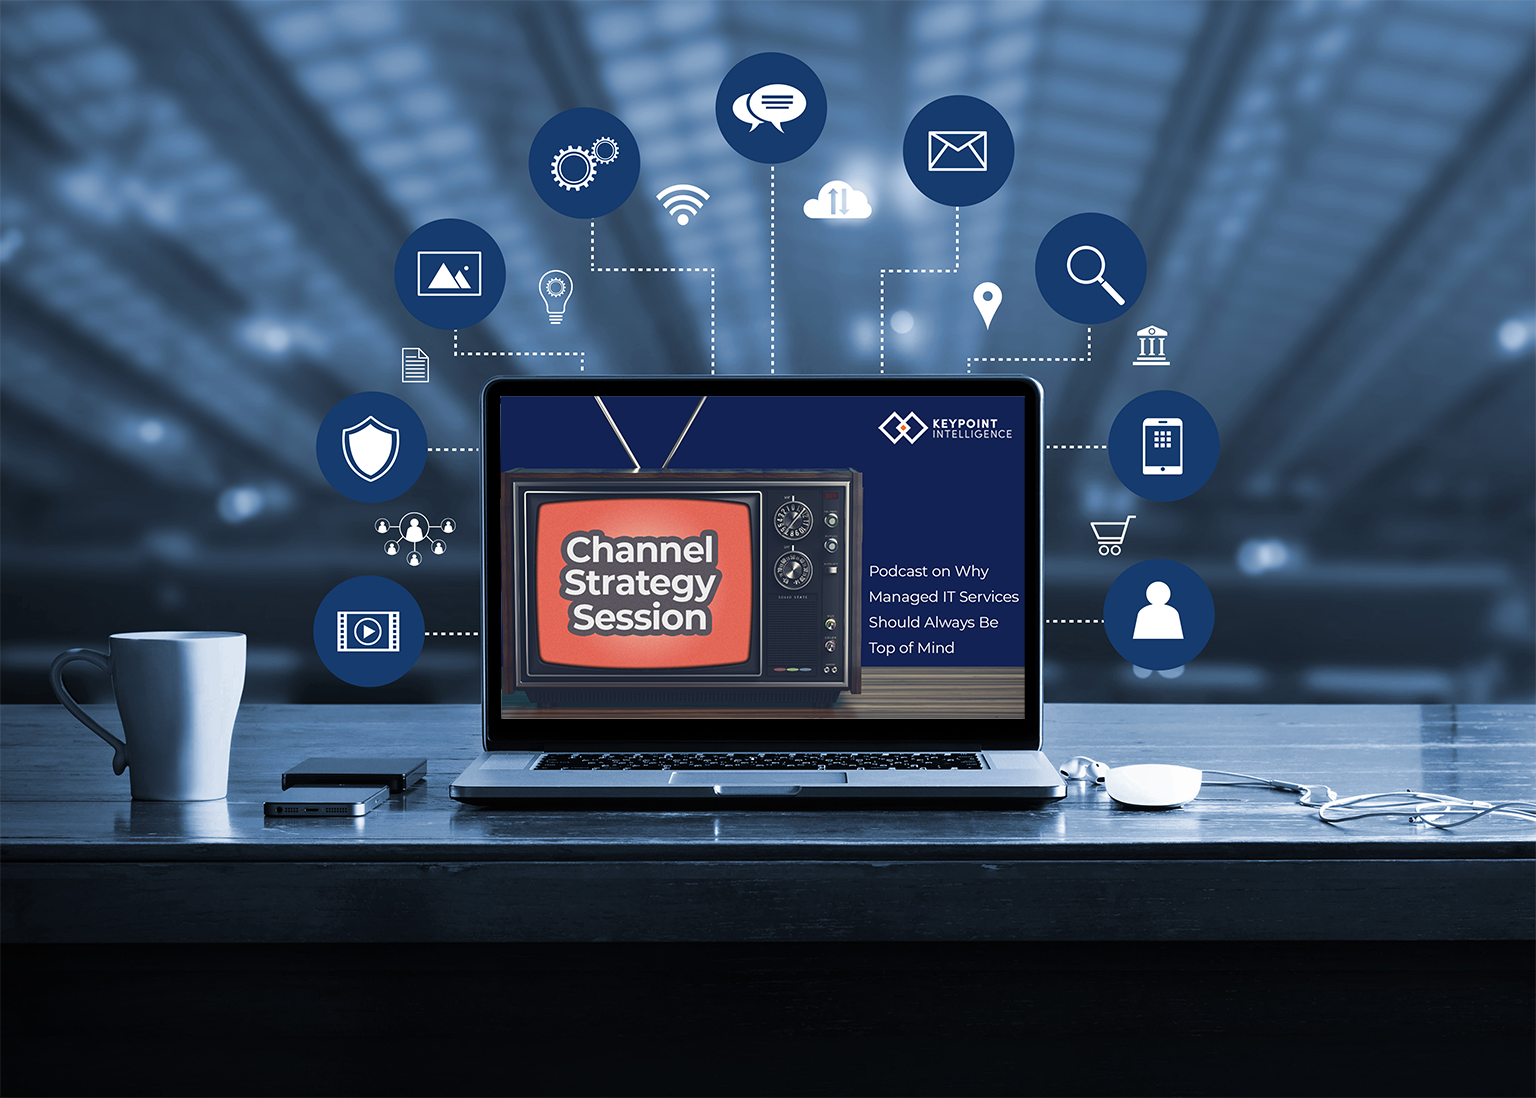 Channel Strategy Session: Managed IT Services Should Always Be Top of Mind